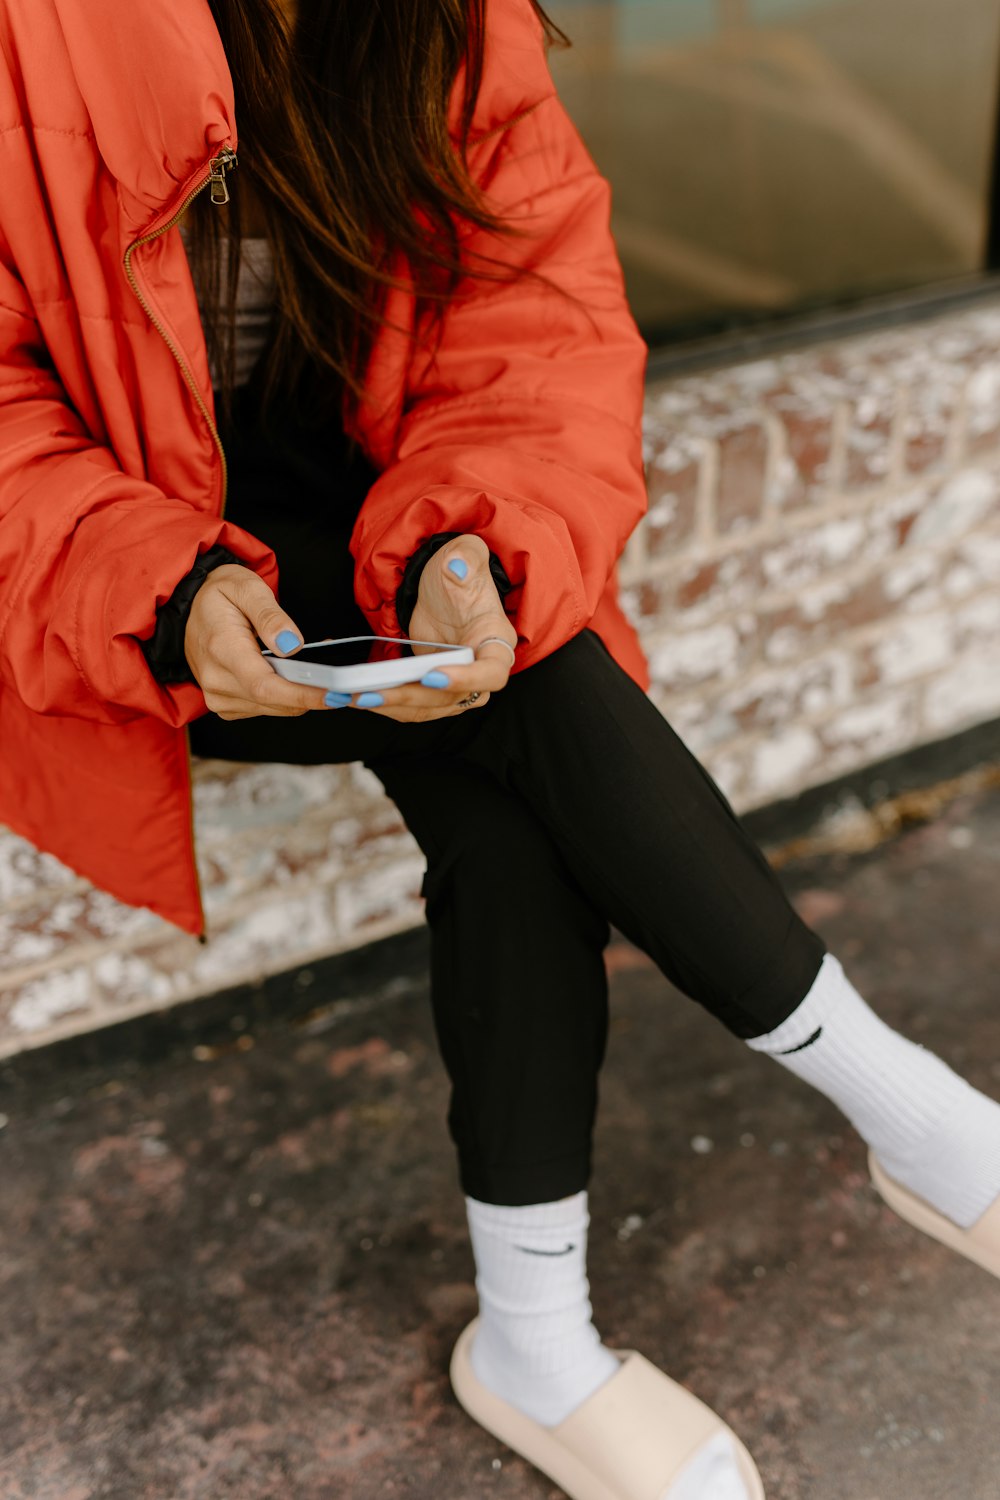 a woman in a red jacket is holding a cell phone